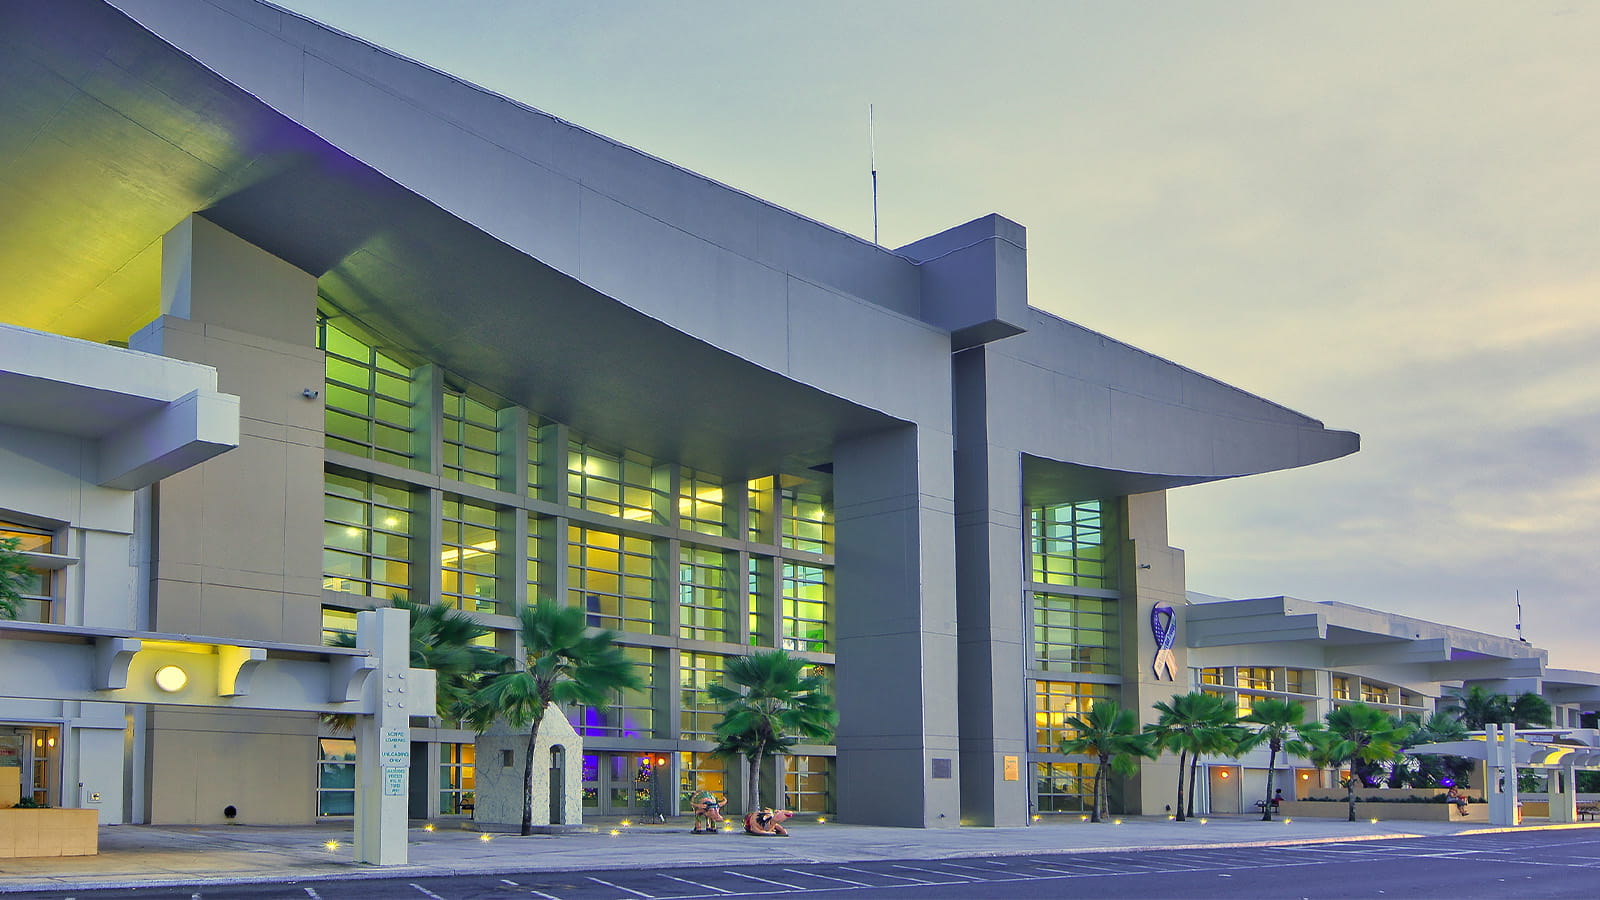 Guam International Airport selected Collins Aerospace solutions to help streamline passenger processing and reduce airport congestion